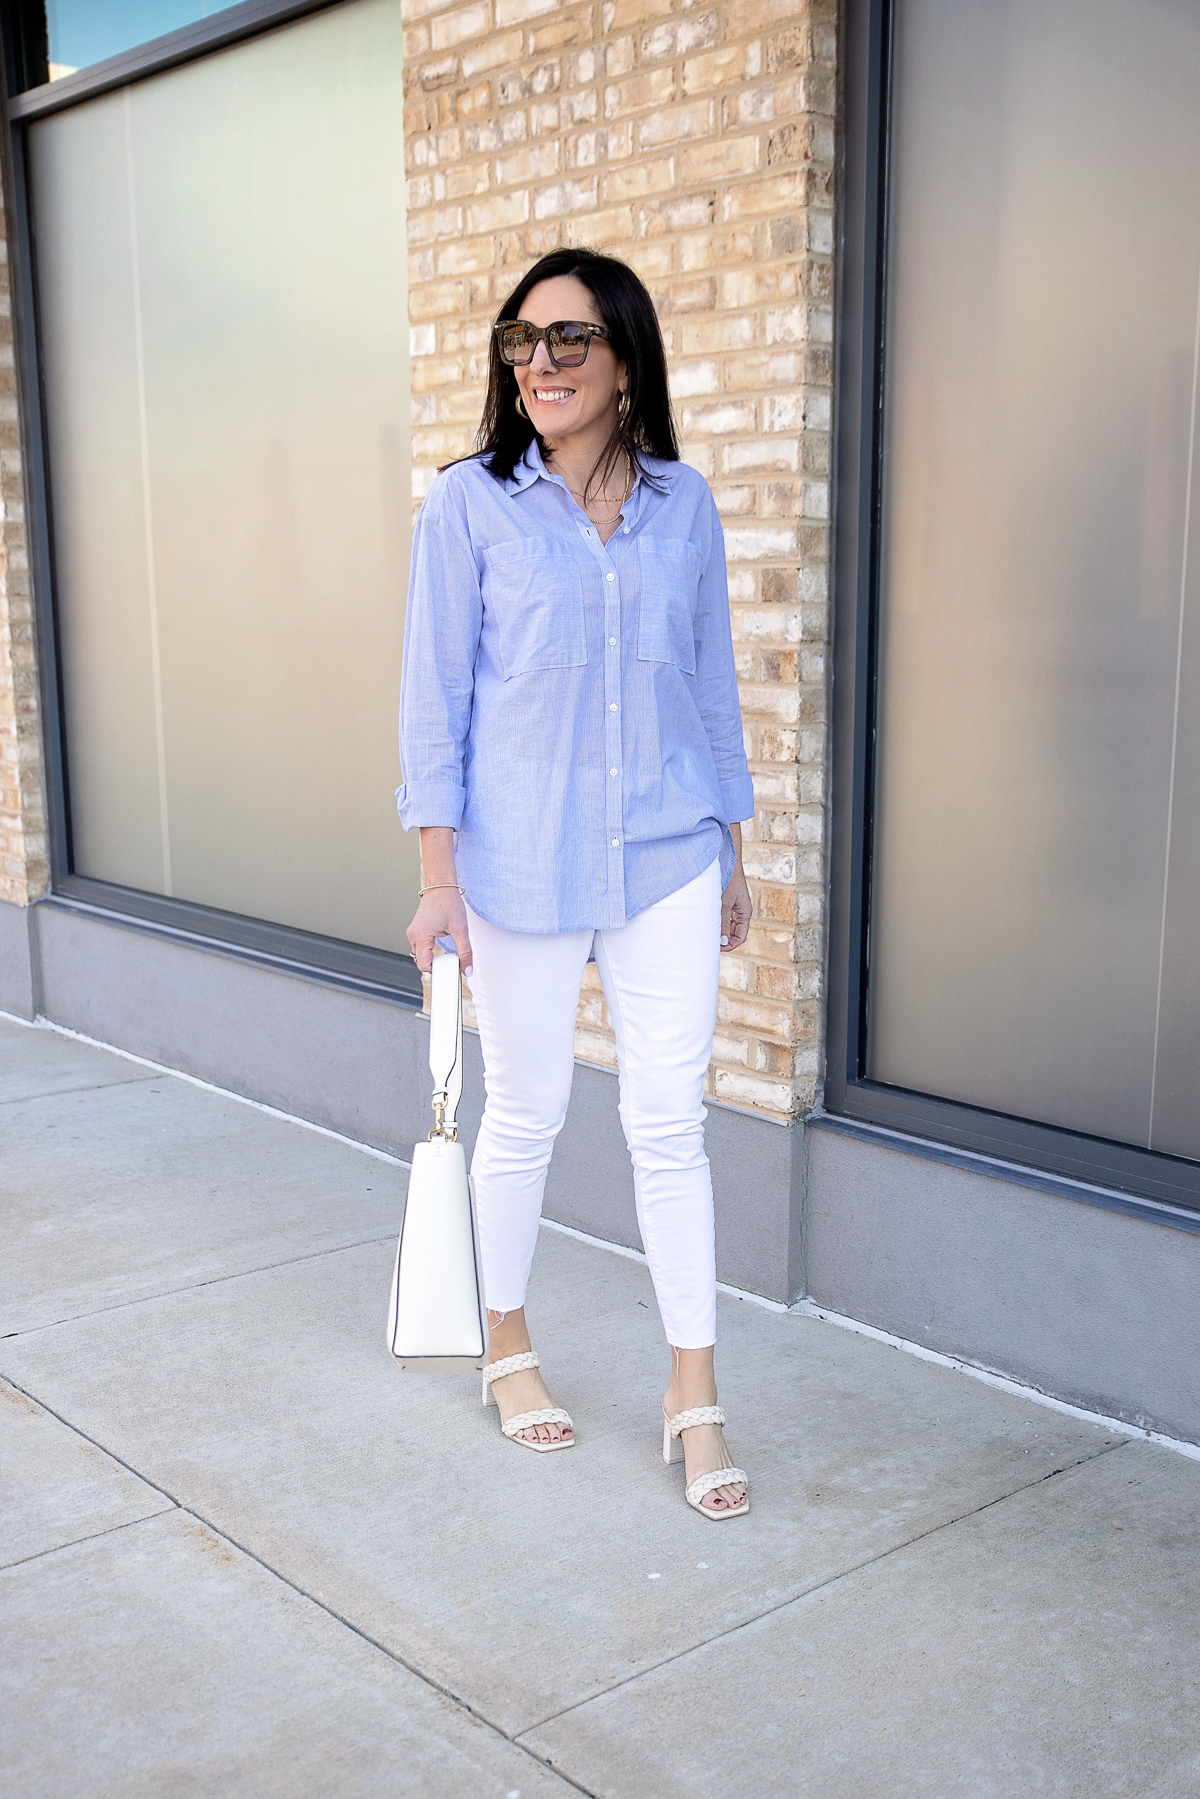 How to Wear An Oversized Button-Up Shirt for Spring